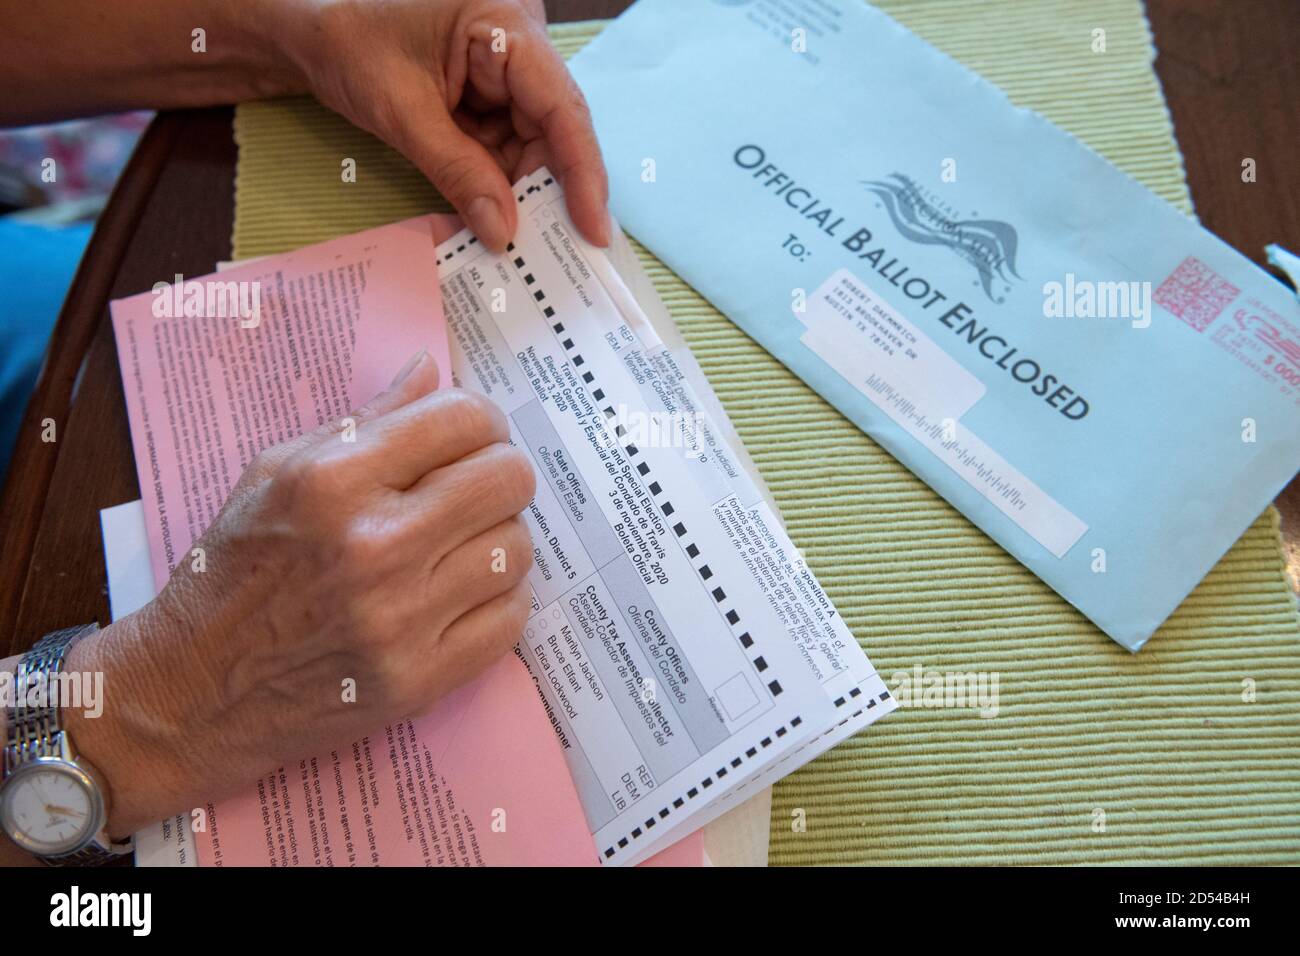 Austin, Texas, October 12, 2020: Woman encloses her completed mail-in absentee ballot into the provided official envelope. The form must to be either mailed back or dropped off in person in time to be counted before the November 3rd election day. Stock Photo